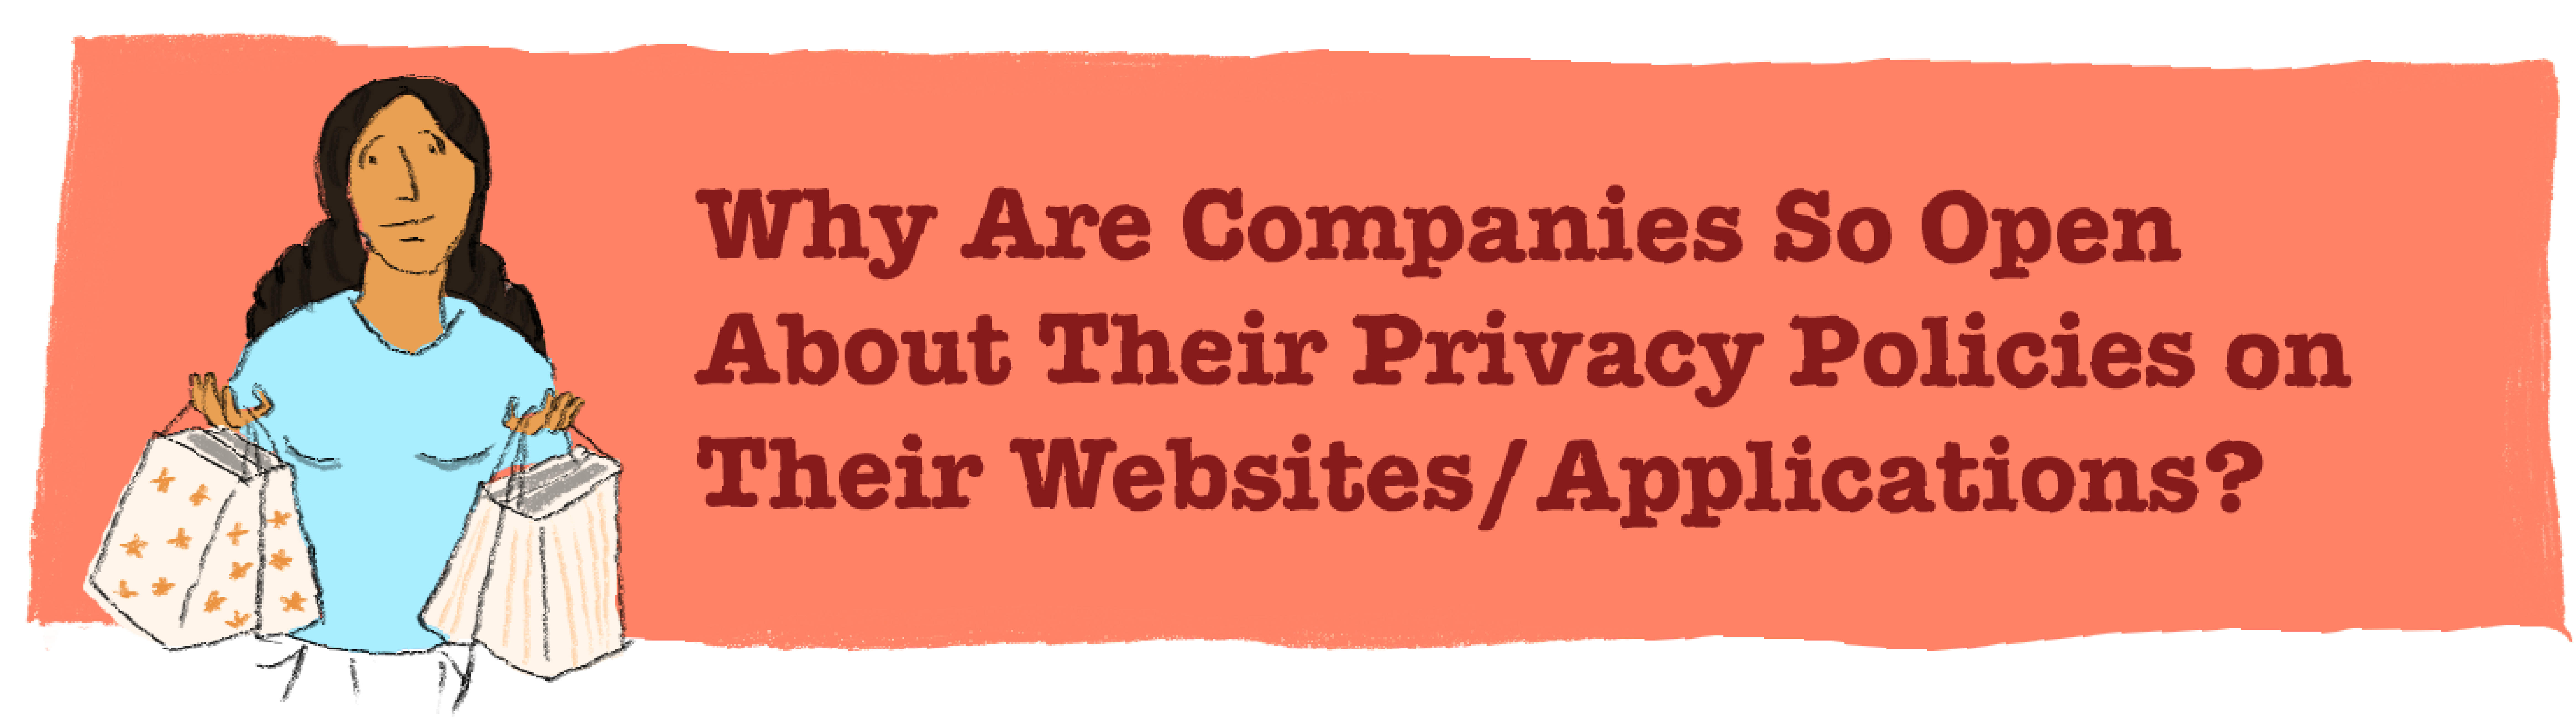 Why are companies so open about their privacy policies on their websites/applications?